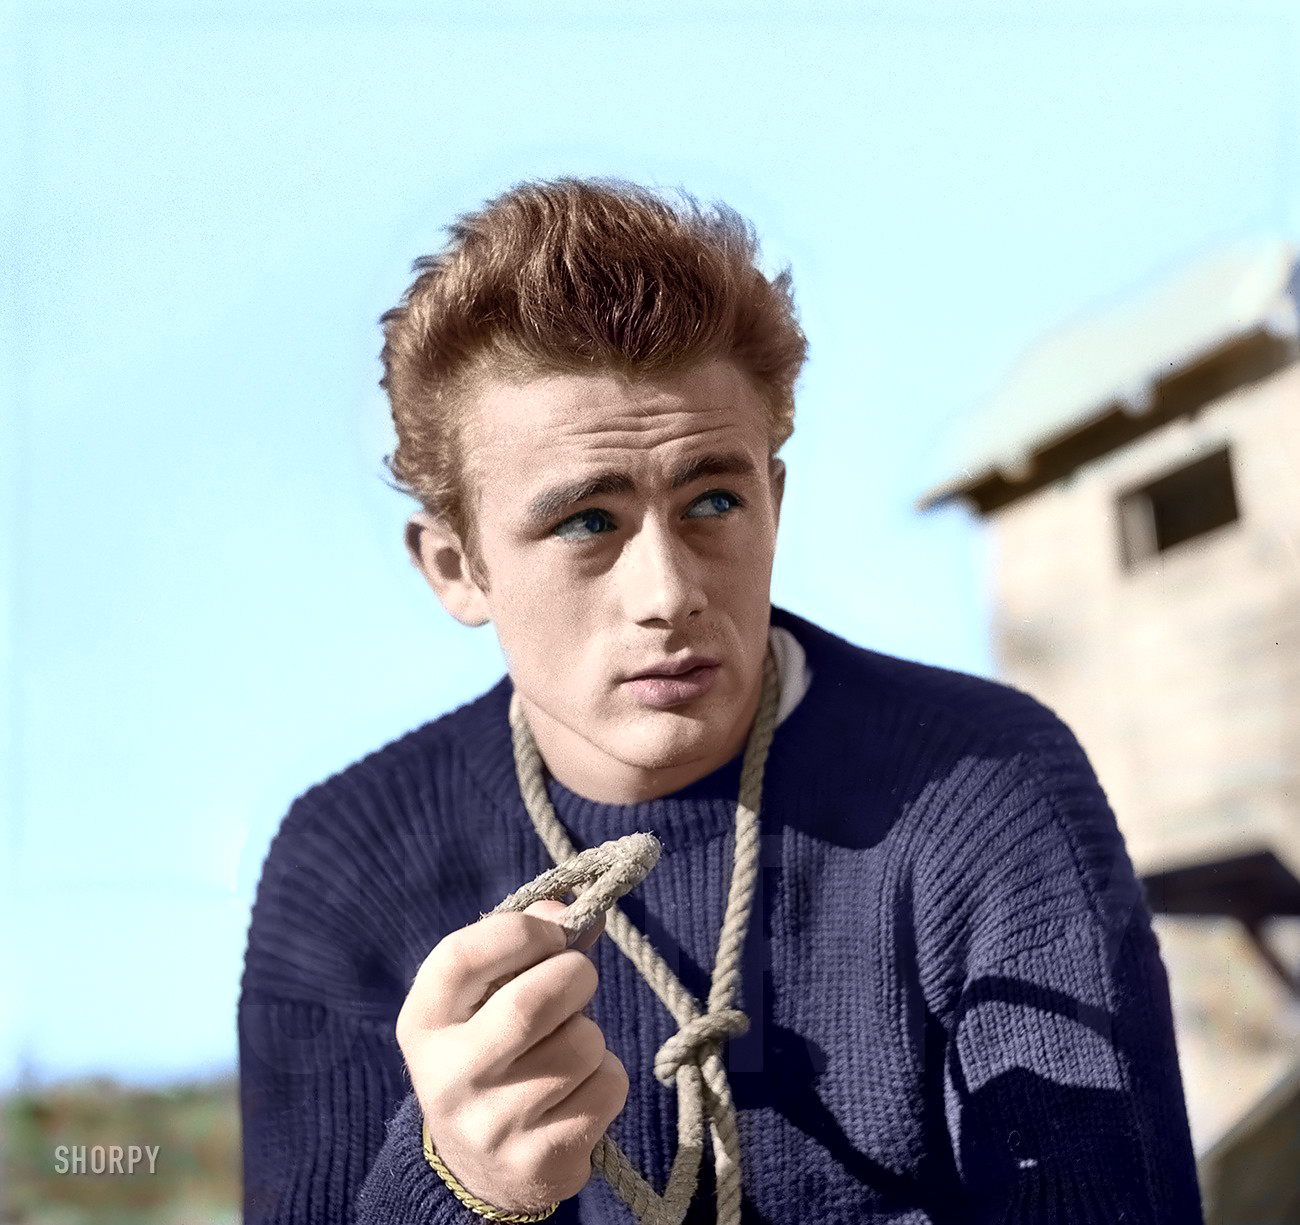 Colorized from this Shorpy original. Cool image of James Dean, apologies to any fans it it's not quite right.  View full size.